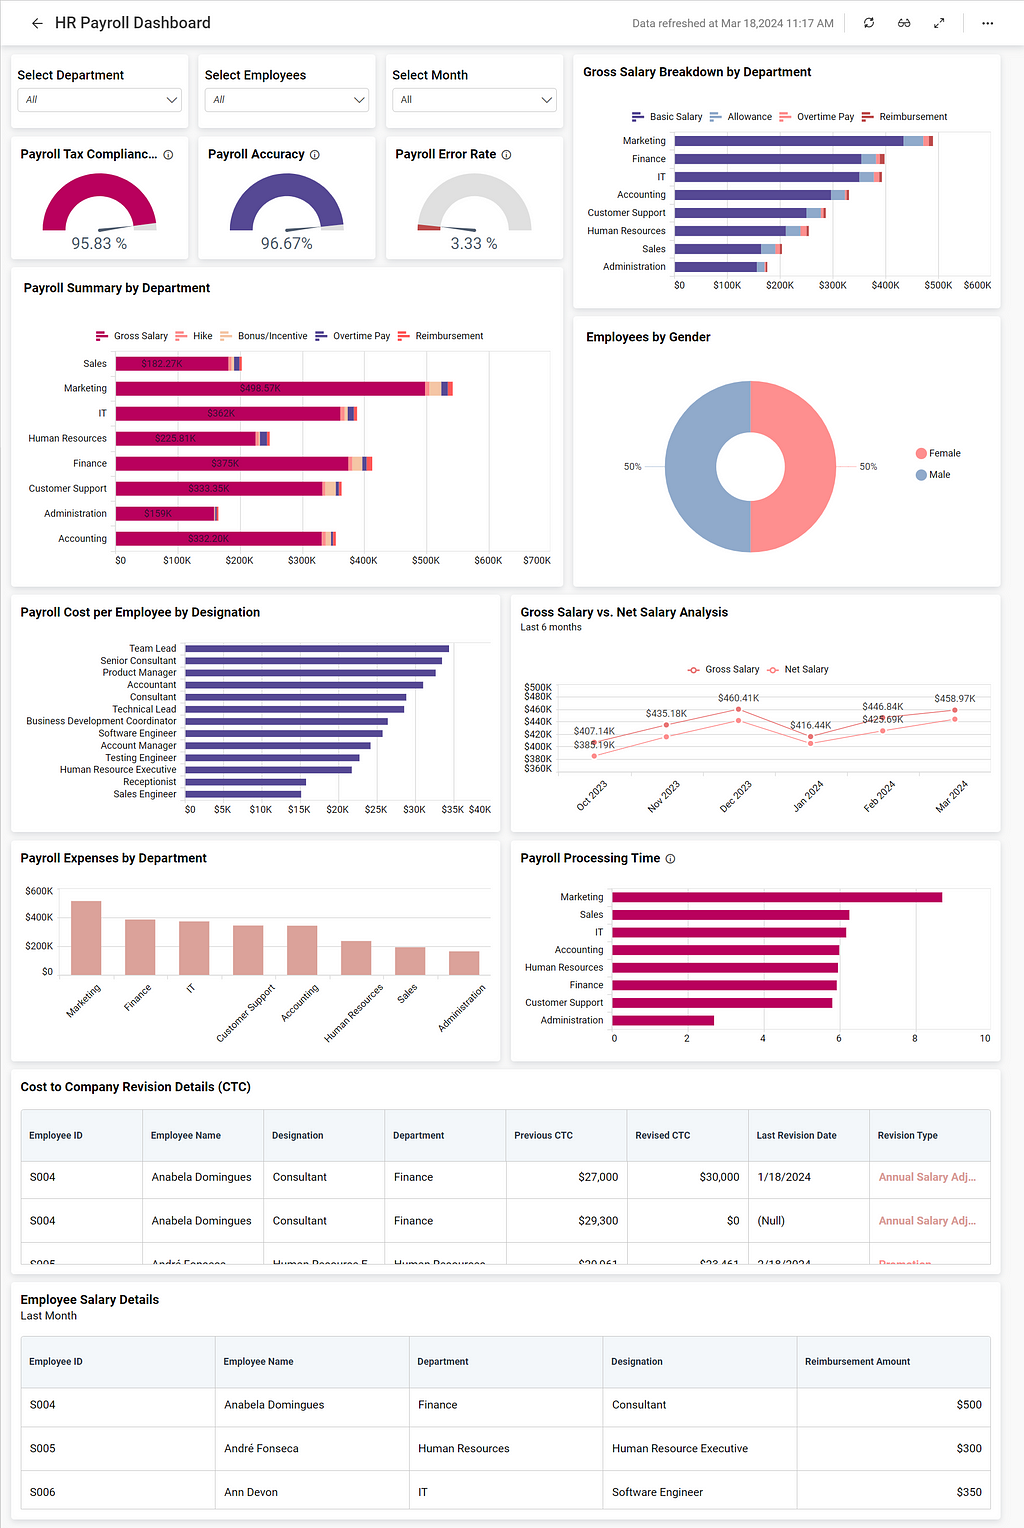 A BI Dashboard for Payroll and Compensation Analysis